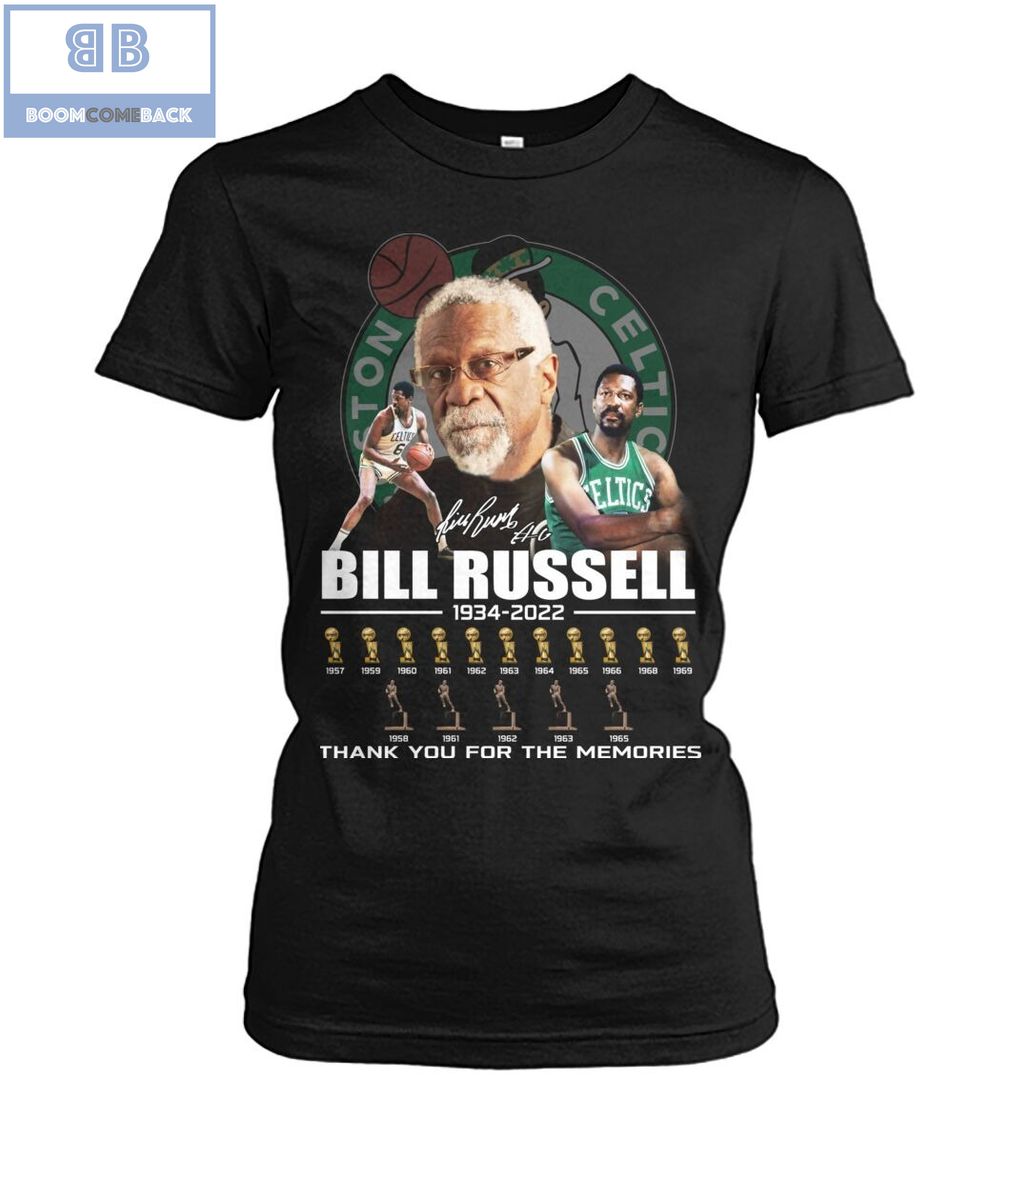 Bill Russell 1934 2022 Thank you For The Memories Shirt